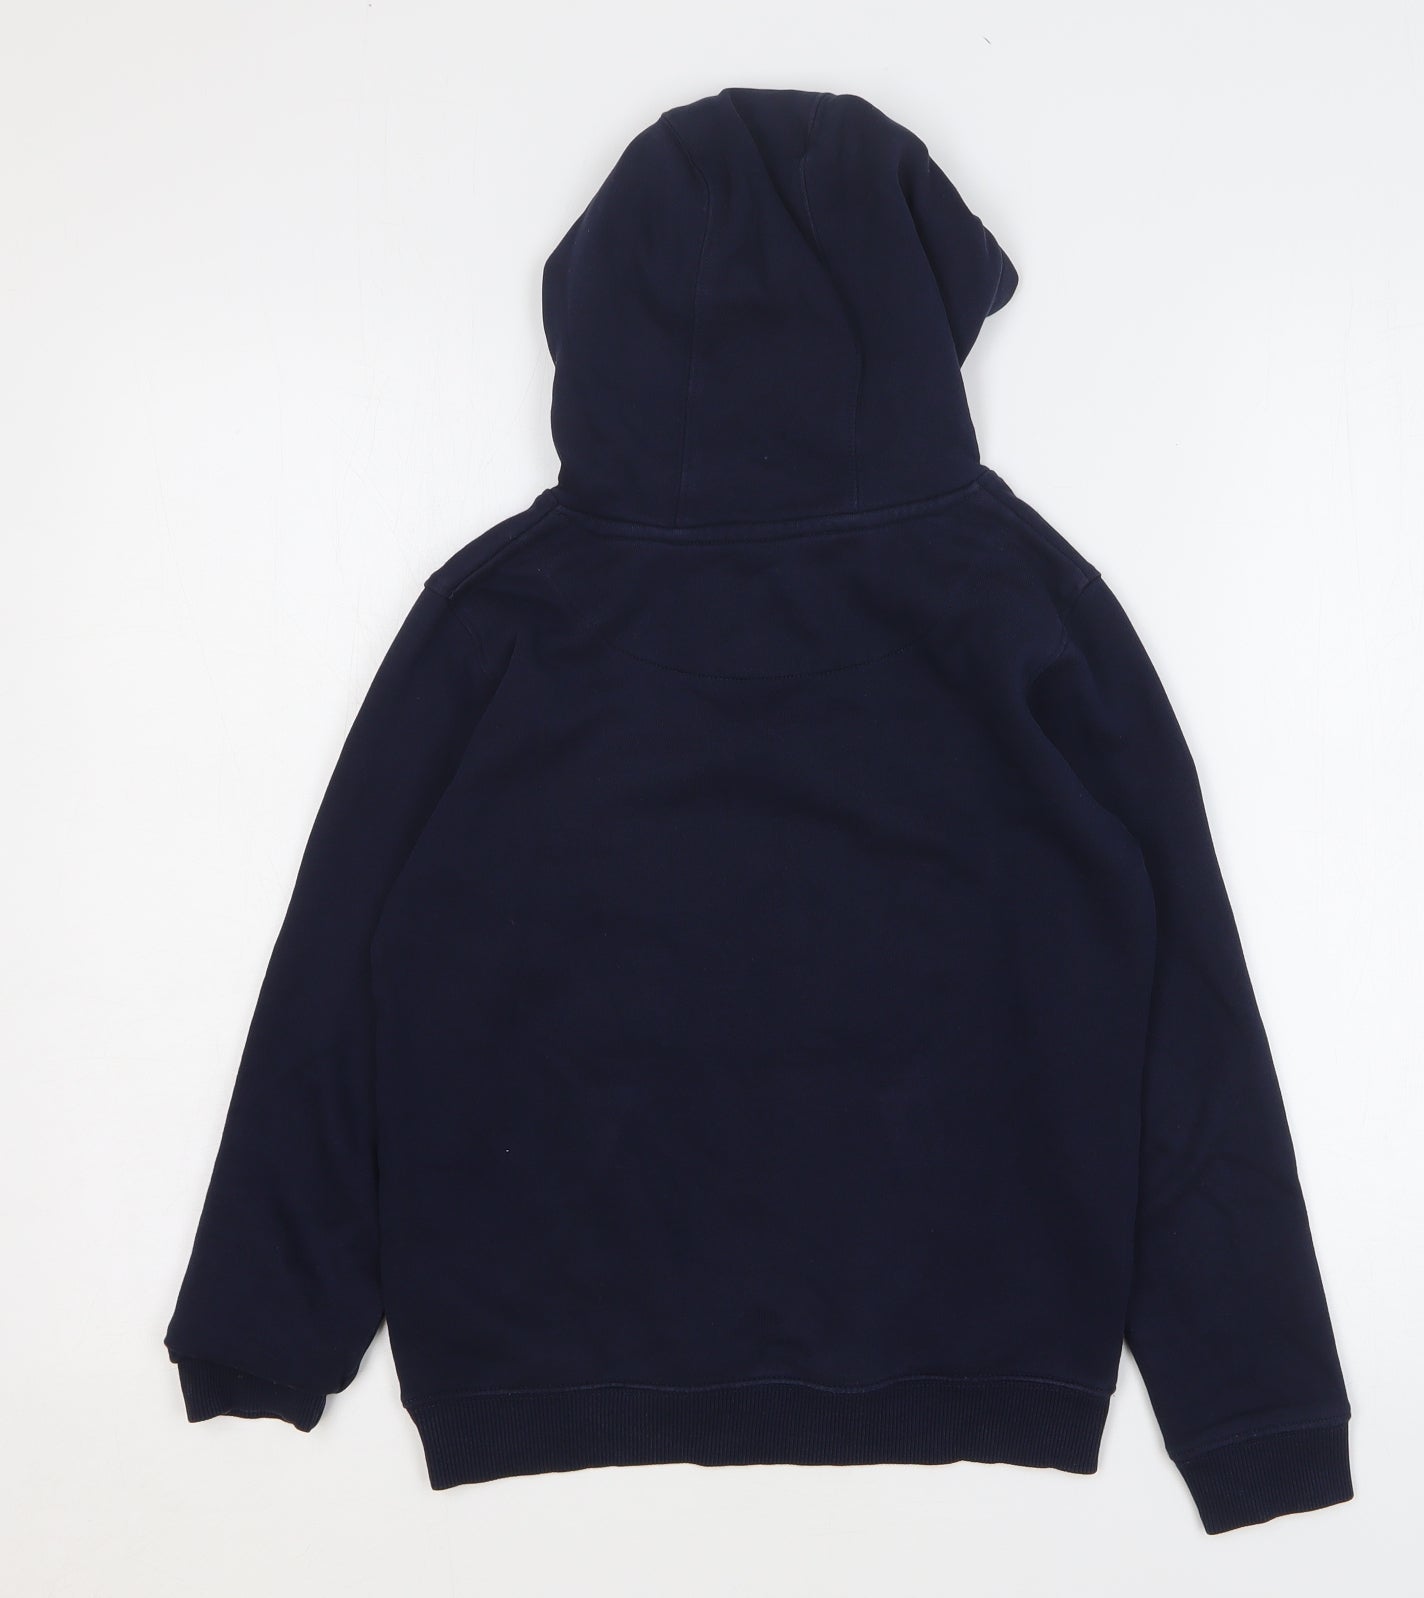 Russell Athletic Boys Blue Cotton Pullover Hoodie Size 9-10 Years Pullover